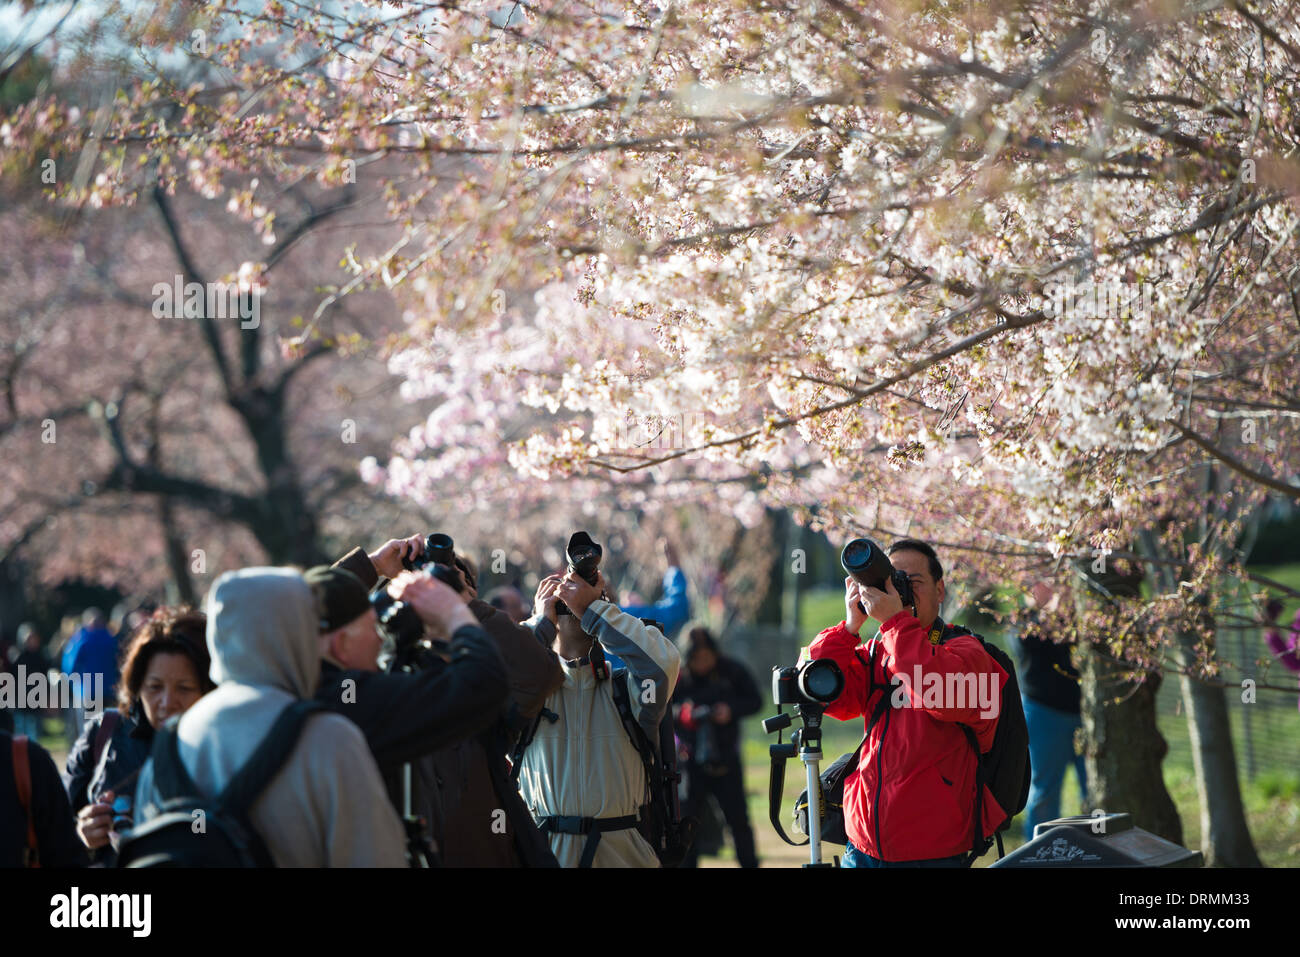 WASHINGTON DC, USA - The flowering of nearly 1700 cherry blossoms around the Tidal Basin, some of which are over a century old, is an annual event in Washington's spring and brings hundreds of thousands of tourists to the city. Stock Photo